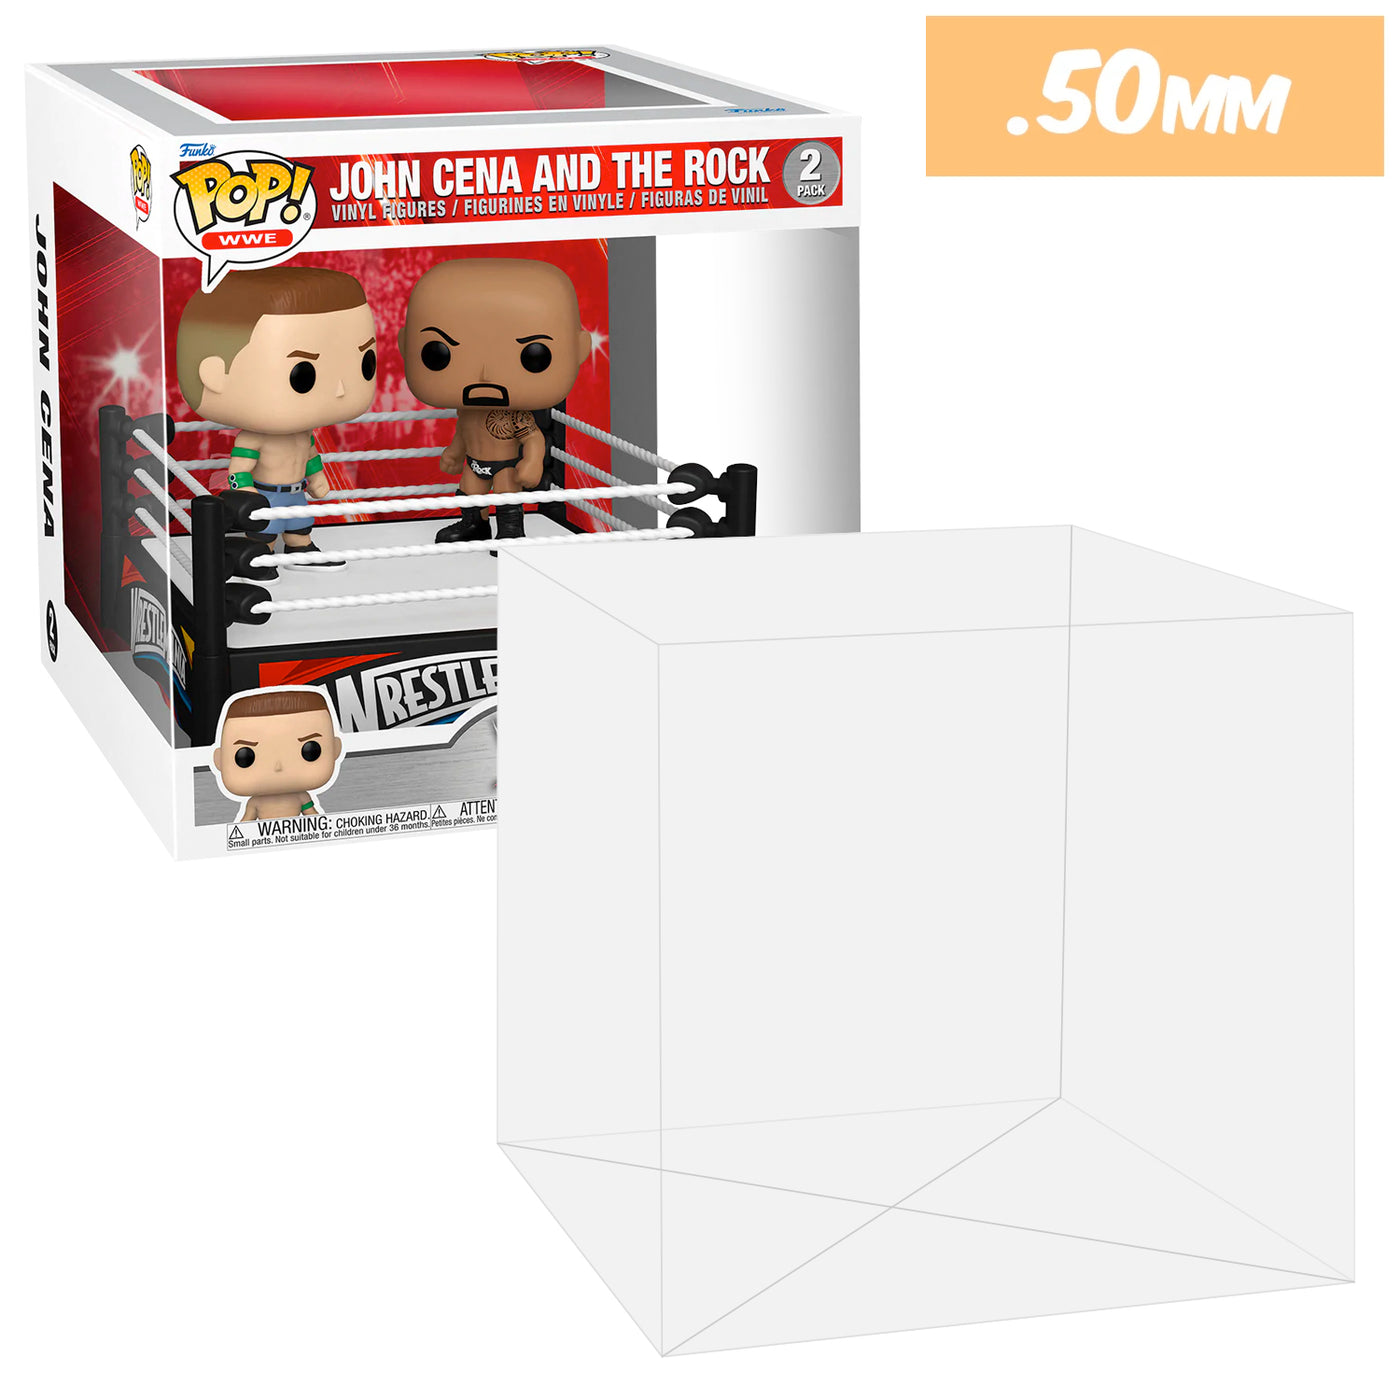 wwe wrestling ring john cena the rock pop deluxe 2 pack best funko pop protectors thick strong uv scratch flat top stack vinyl display geek plastic shield vaulted eco armor fits collect protect display case kollector protector